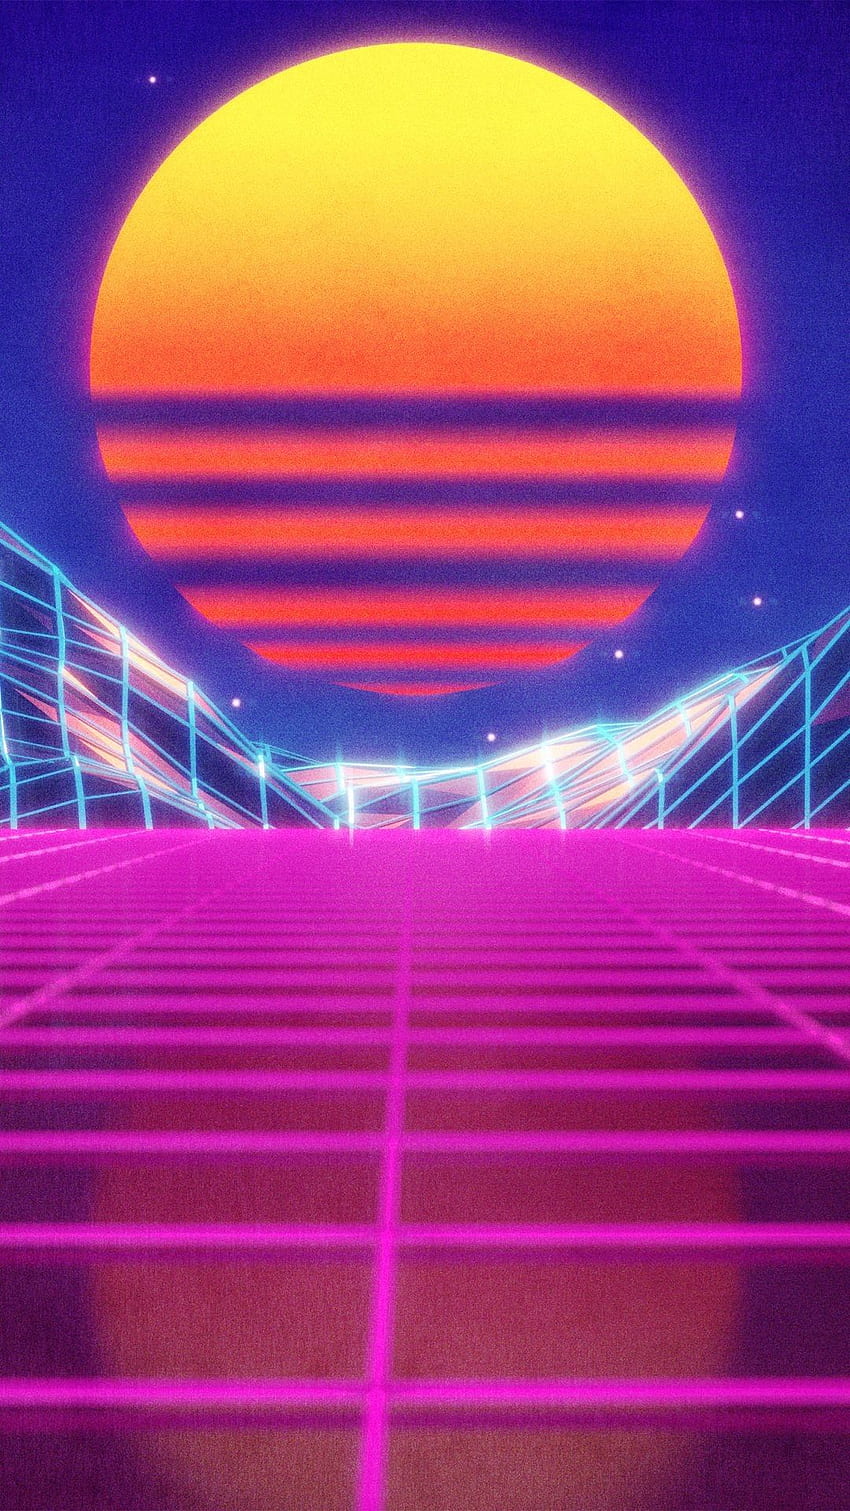 65 Retro 80s - Android, iPhone, Background / (, ) (png / jpg) (2021), 80s Music HD 전화 배경 화면